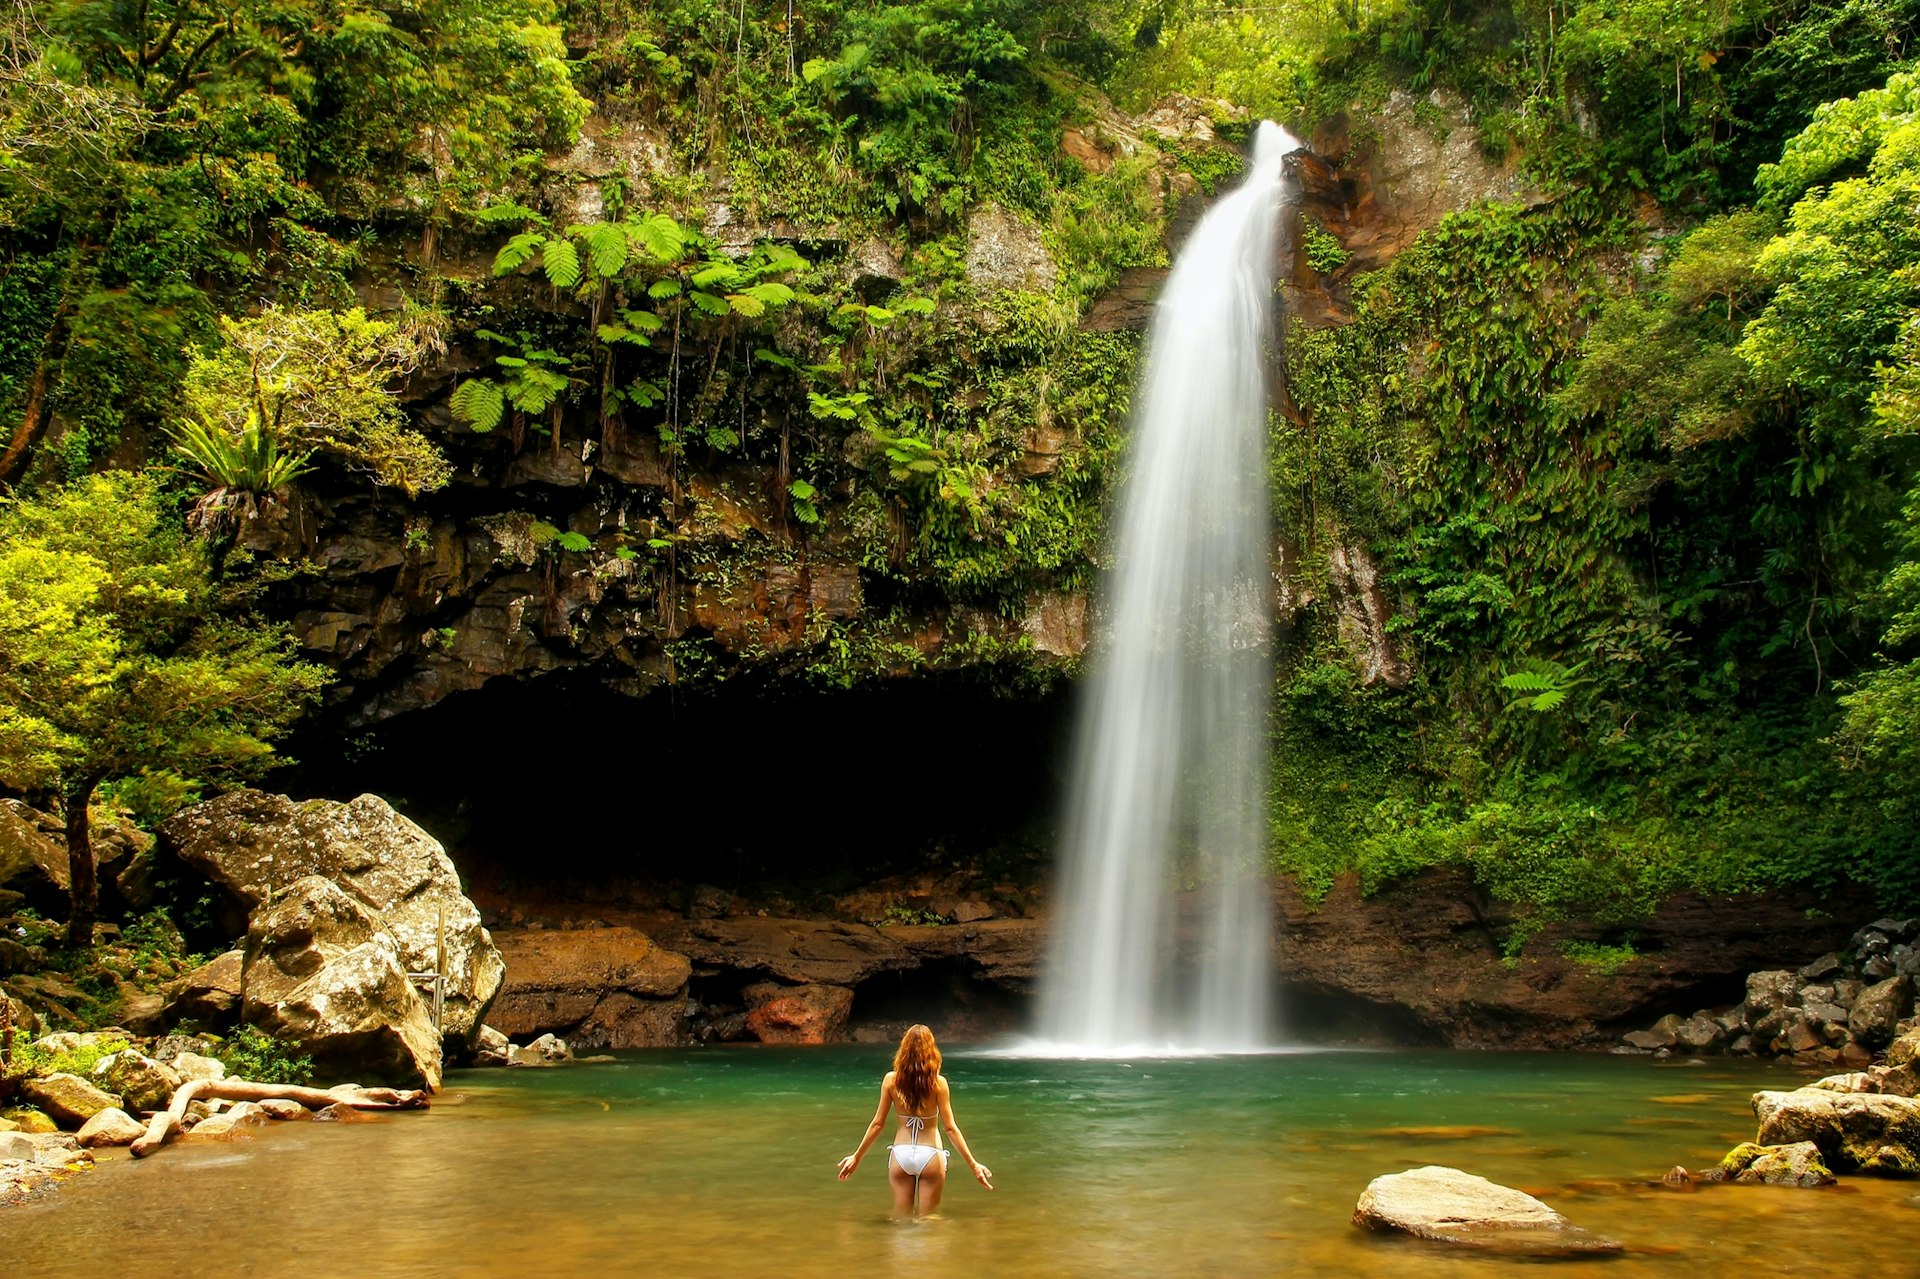 A woman stands in the water facing a tall waterfall surrounded by lush foliage